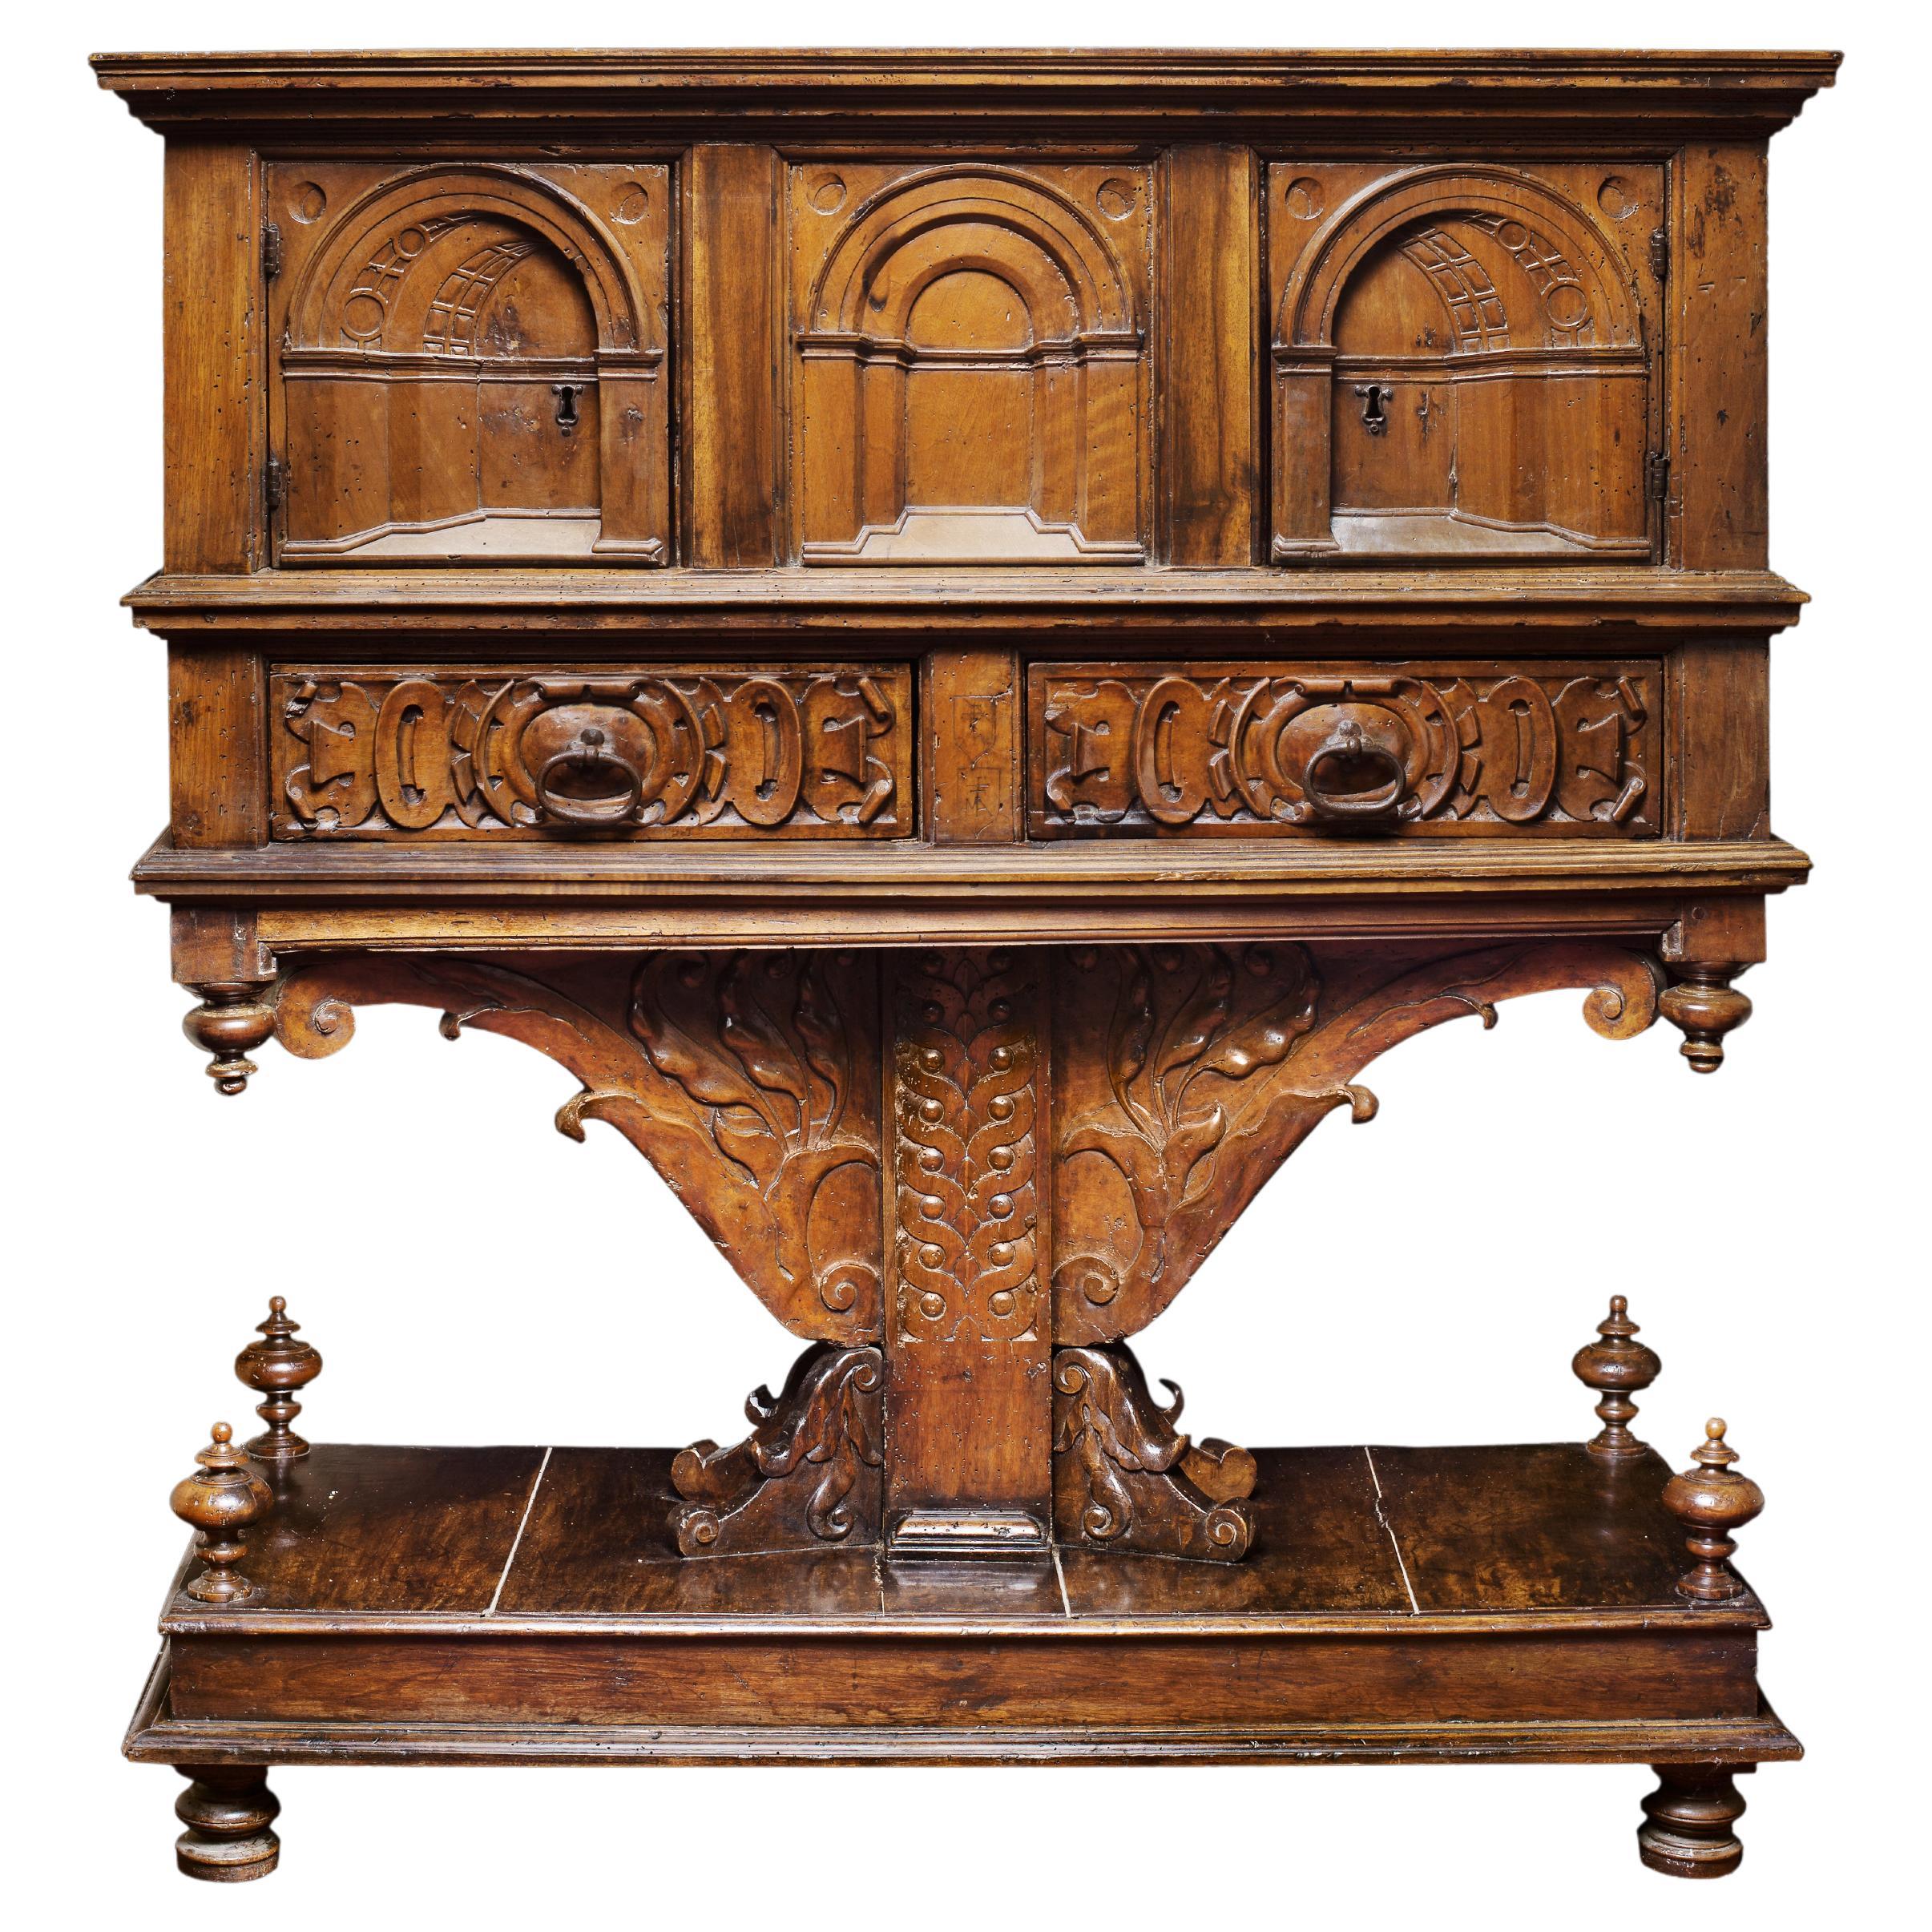 Rare Italian Renaissance Perspectives Sideboard with Fan-shaped Pedestal